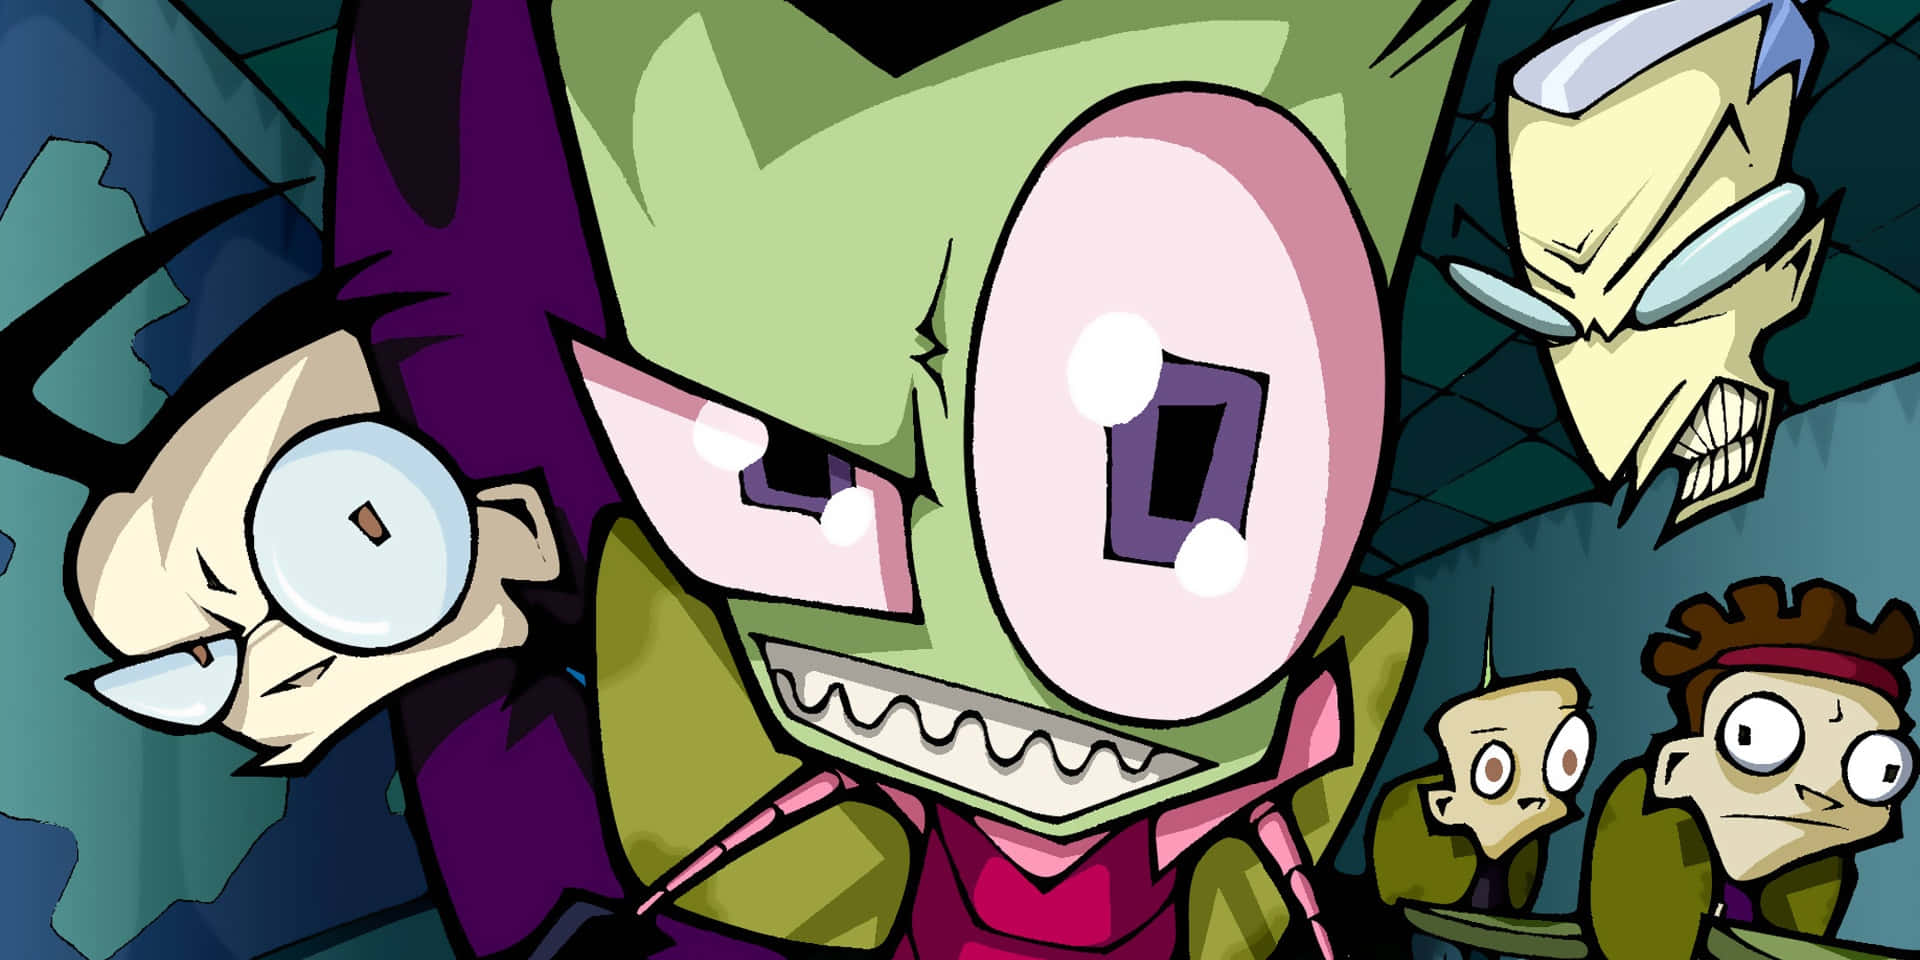 Invader Zim is ready for another exciting mission